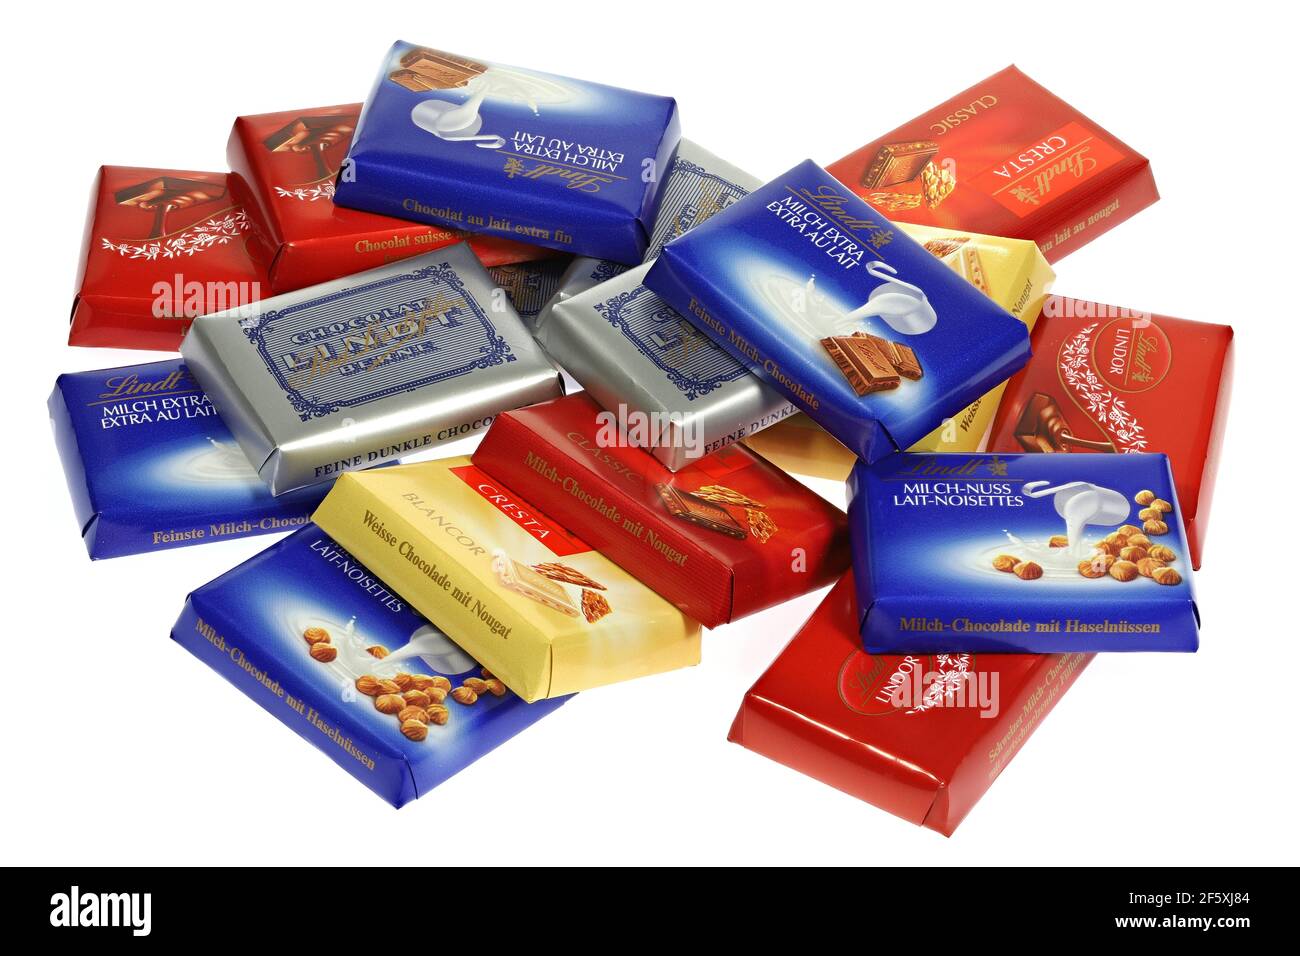 https://c8.alamy.com/comp/2F5XJ84/selection-of-lindt-chocolate-bars-isolated-on-white-background-2F5XJ84.jpg